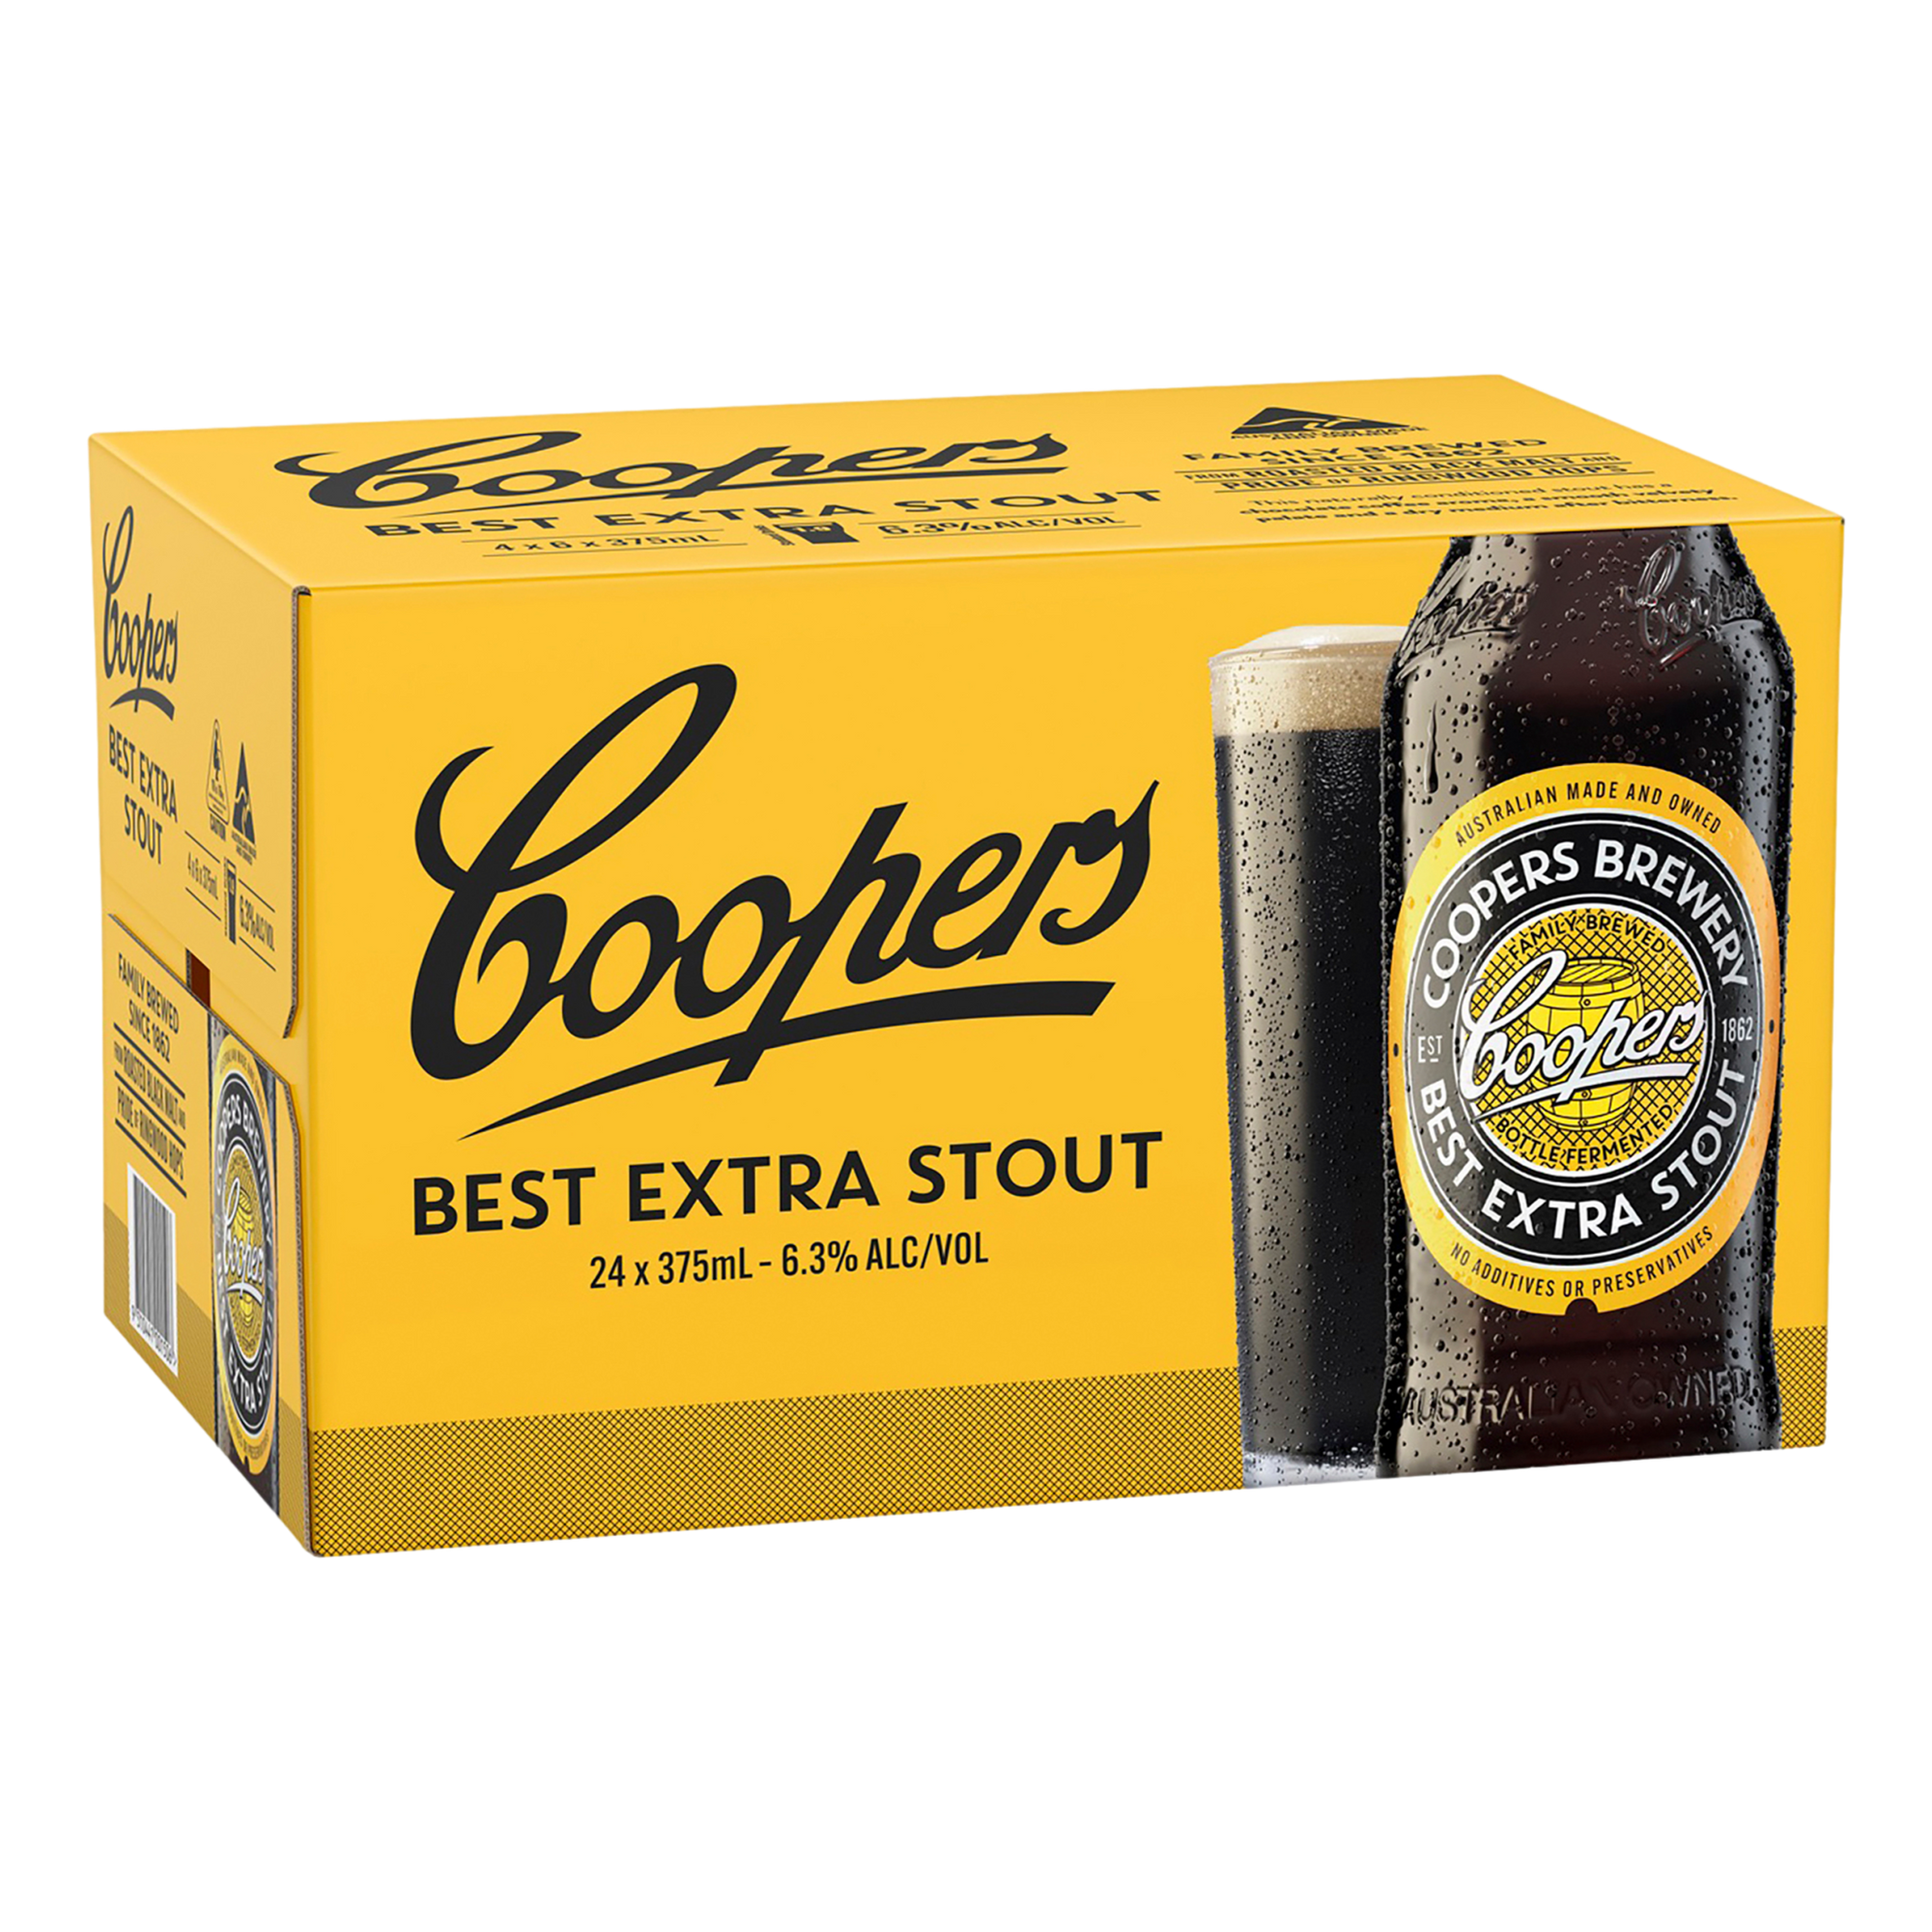 Coopers Extra Stout 375ml Bottle Case of 24